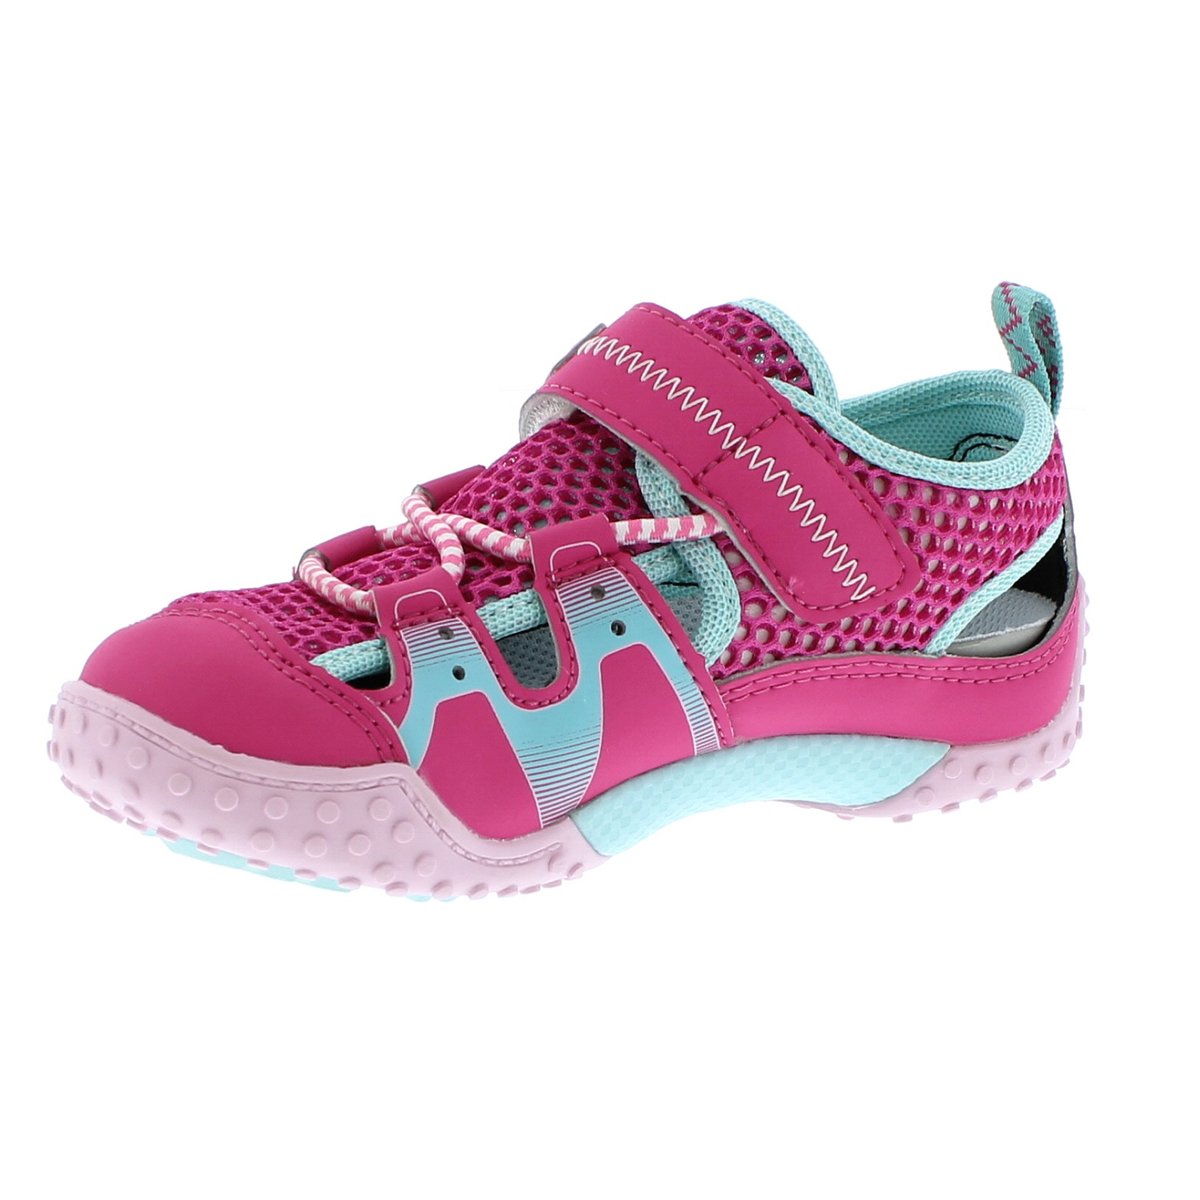 Child Tsukihoshi Ibiza2 Sneaker in Fuchsia/Mint from the front view